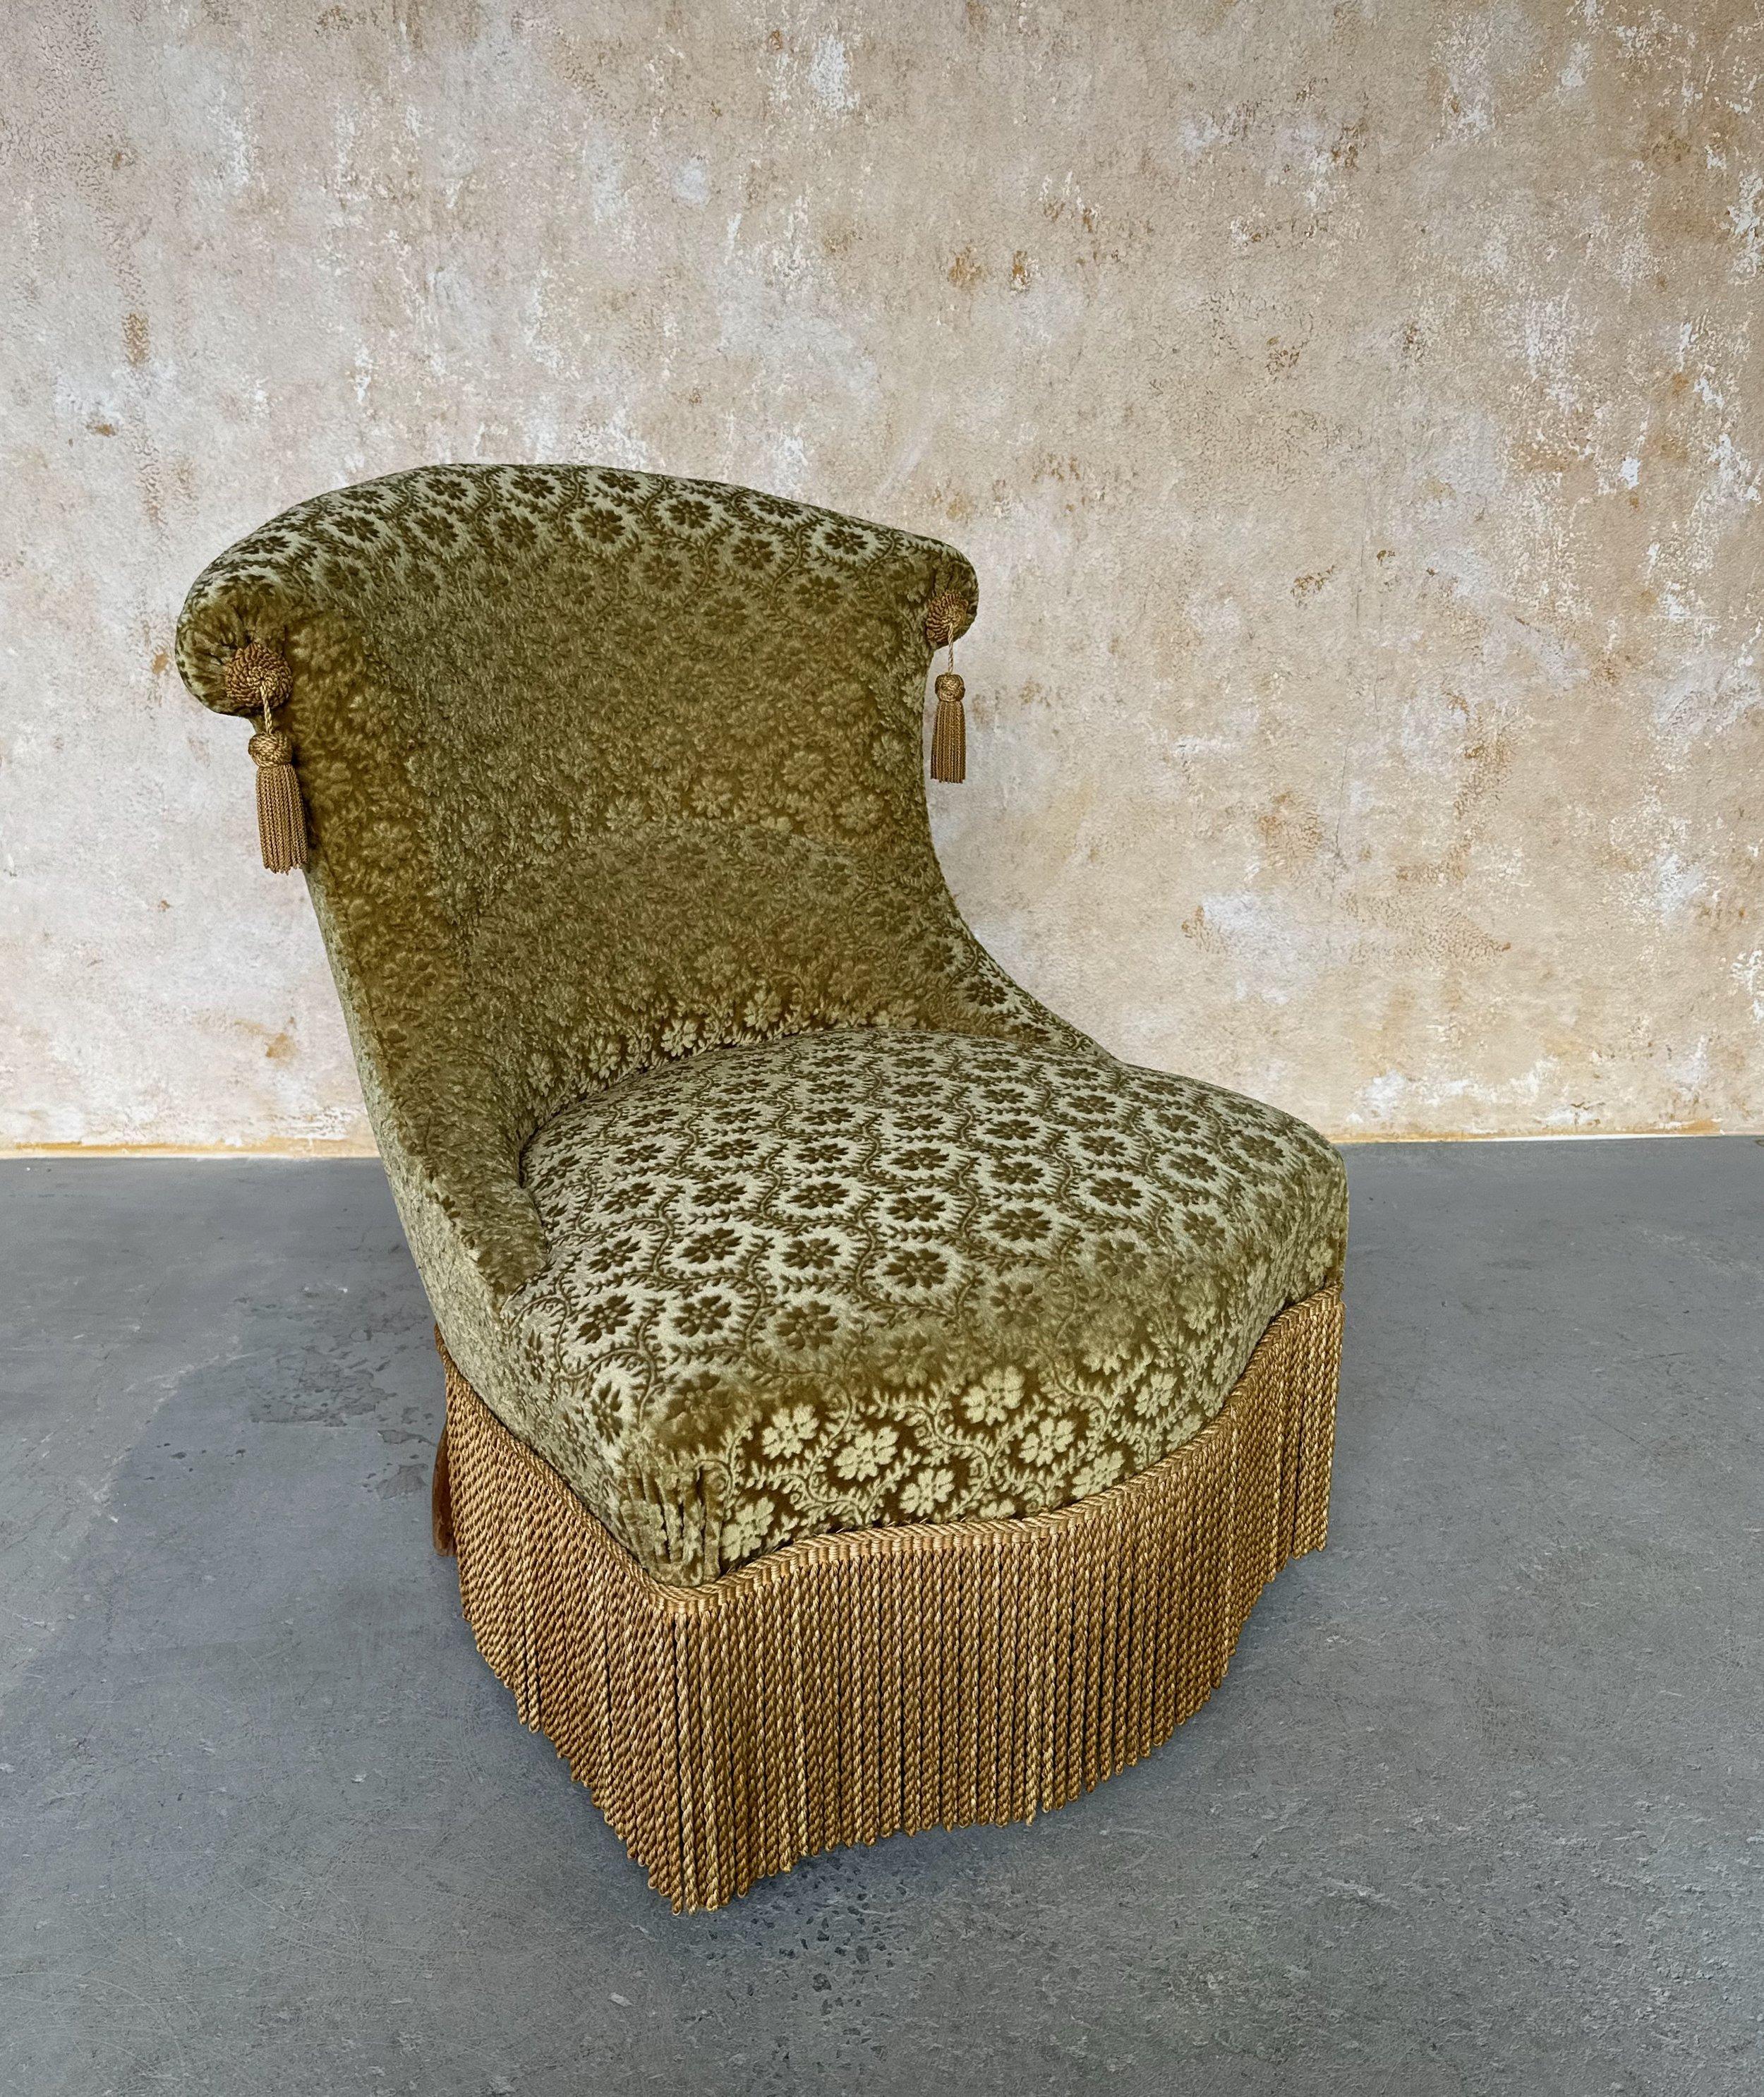 This elegant French Napoleon III slipper chair  is upholstered in a plush floral patterned gold velvet with tassel adornments and matching bullion fringe. The beautifully curved back makes it incredibly comfortable. With dimensions of 30 inches